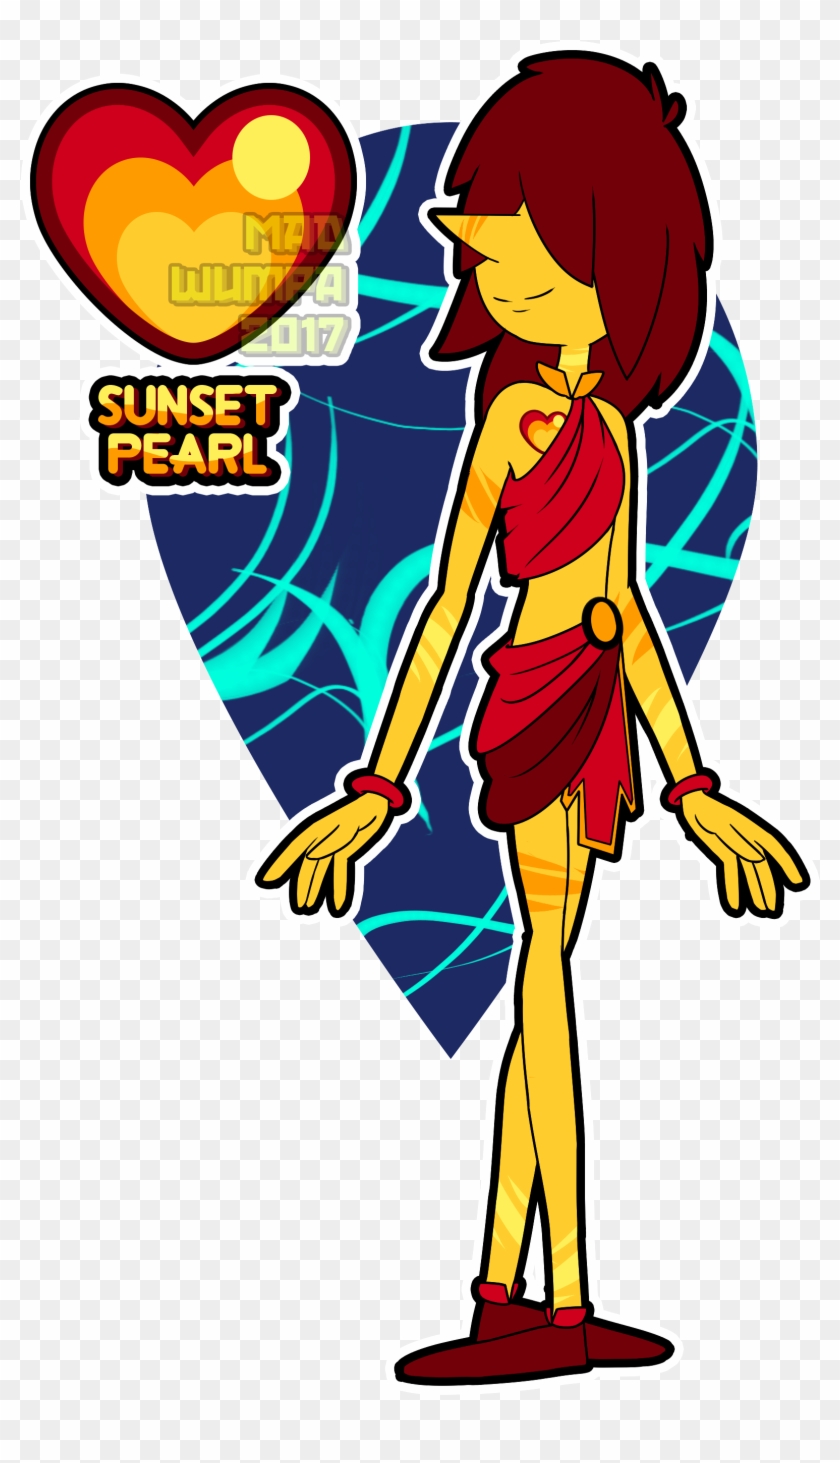 Sunset Pearl By Mad-wumpa - Adoption #836540